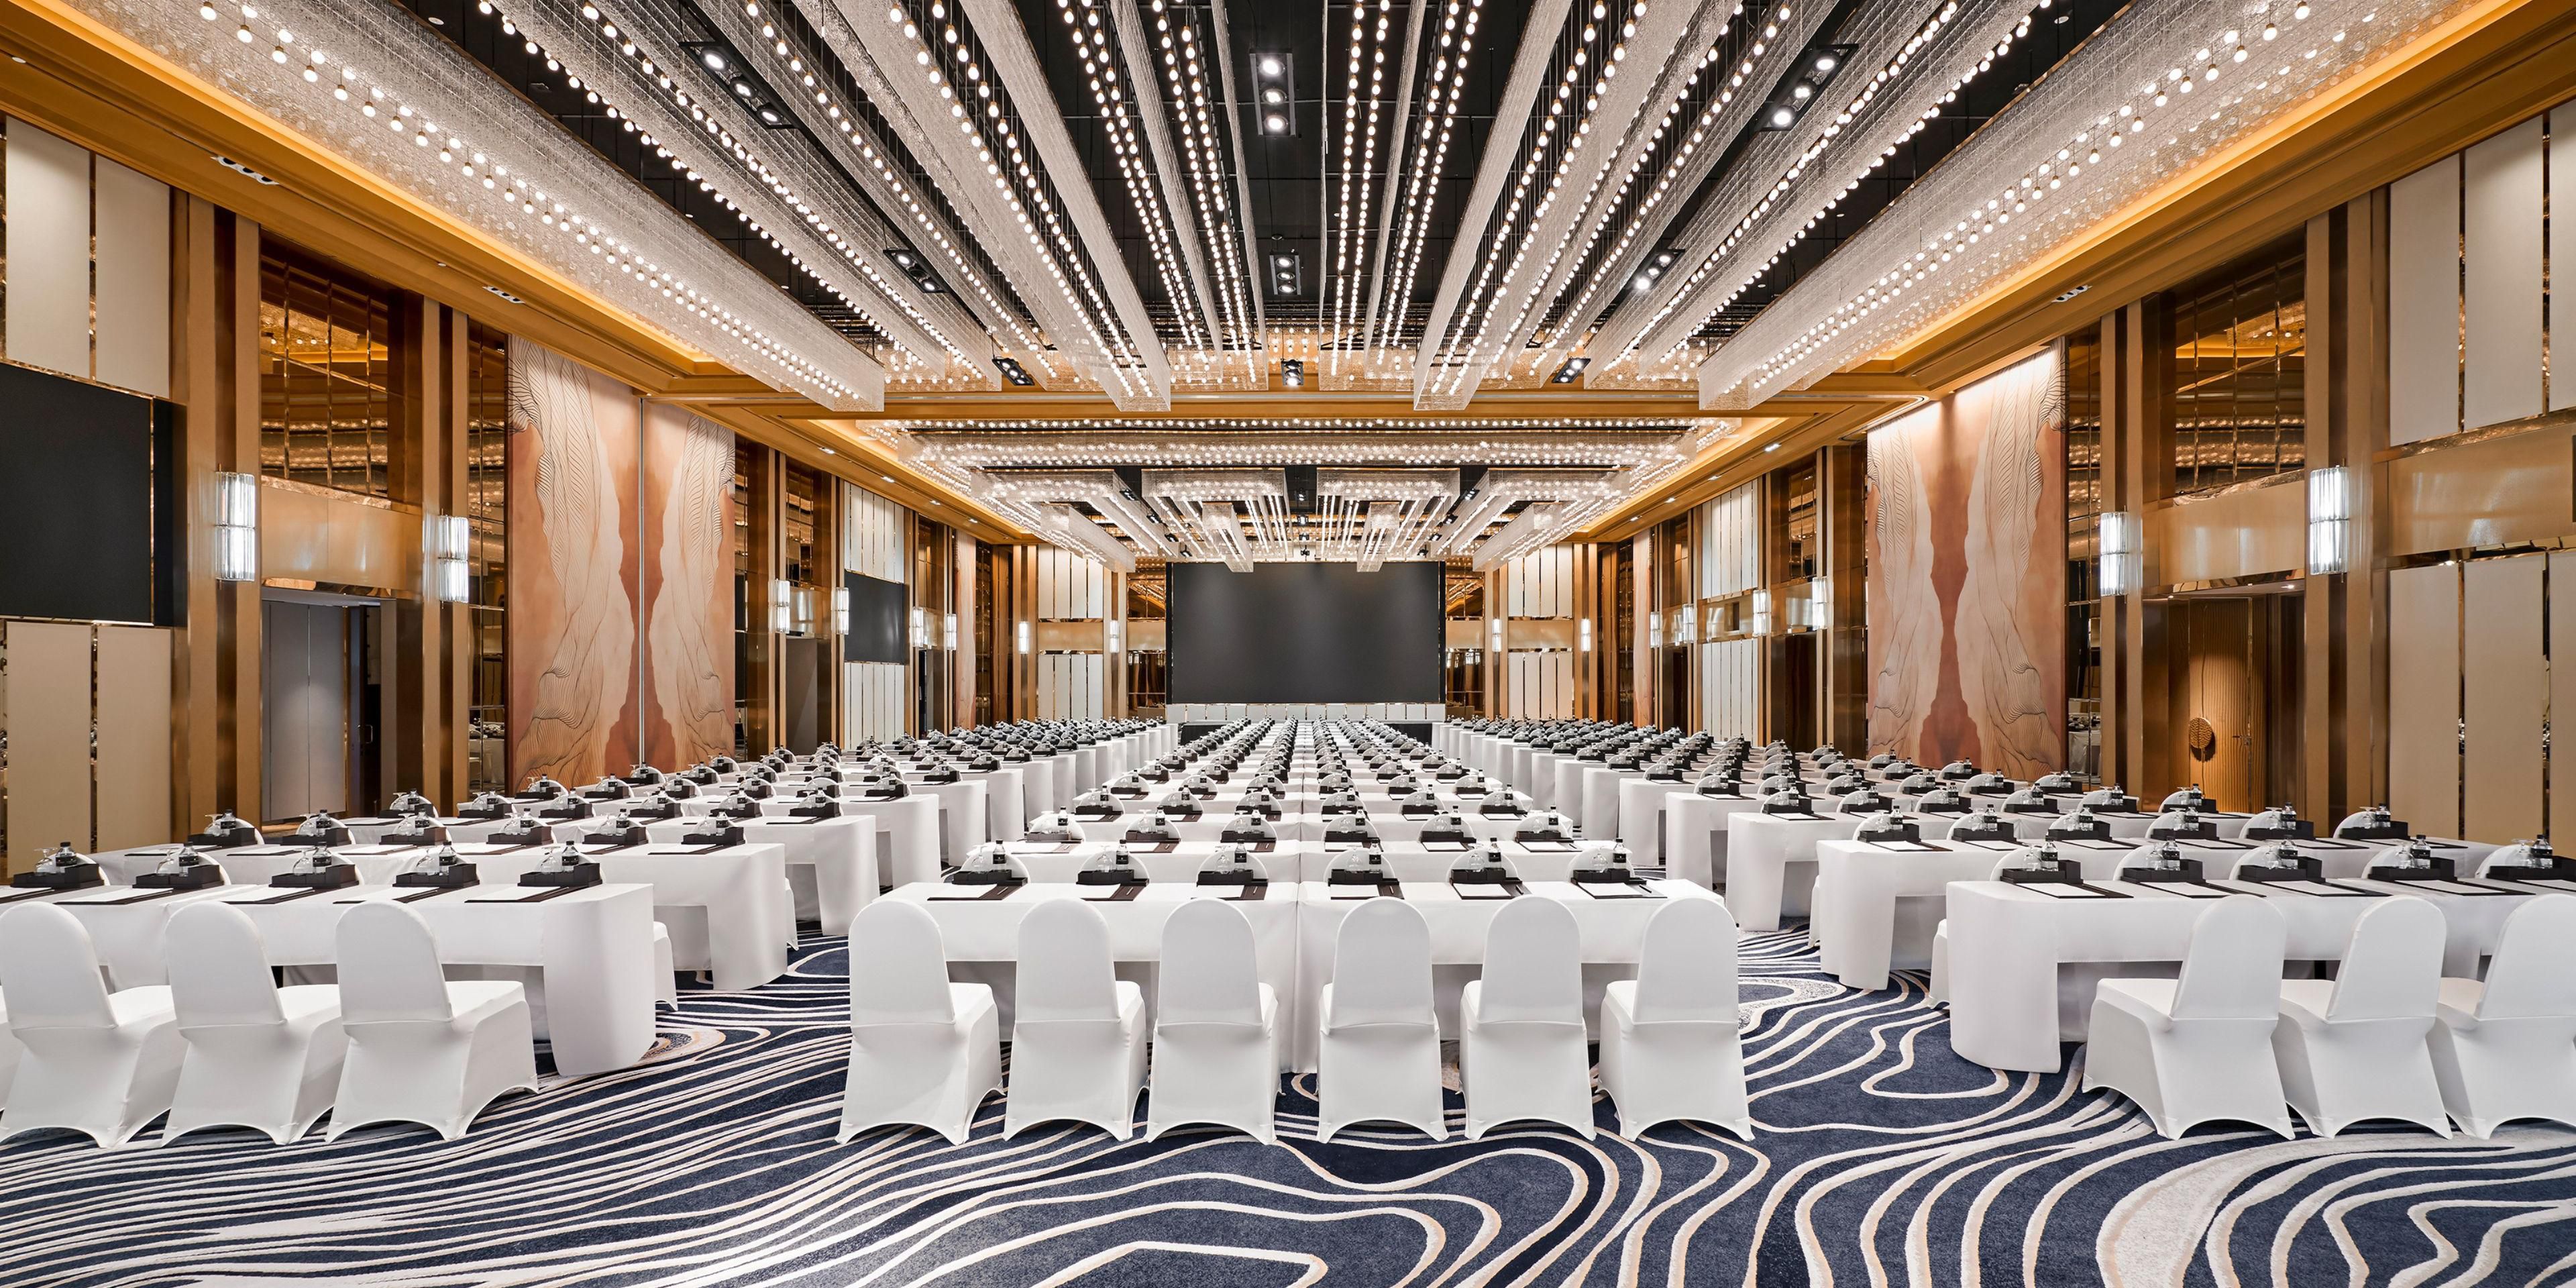 Experience seamless meetings and conferences at the newly renovated Grand Ballroom and meeting spaces of InterContinental Saigon. The hotel features over 1,800 sqm of elegant meeting space bathed in natural lighting, state-of-the-art facilities, and one of the largest pillar-less grand ballrooms in town.